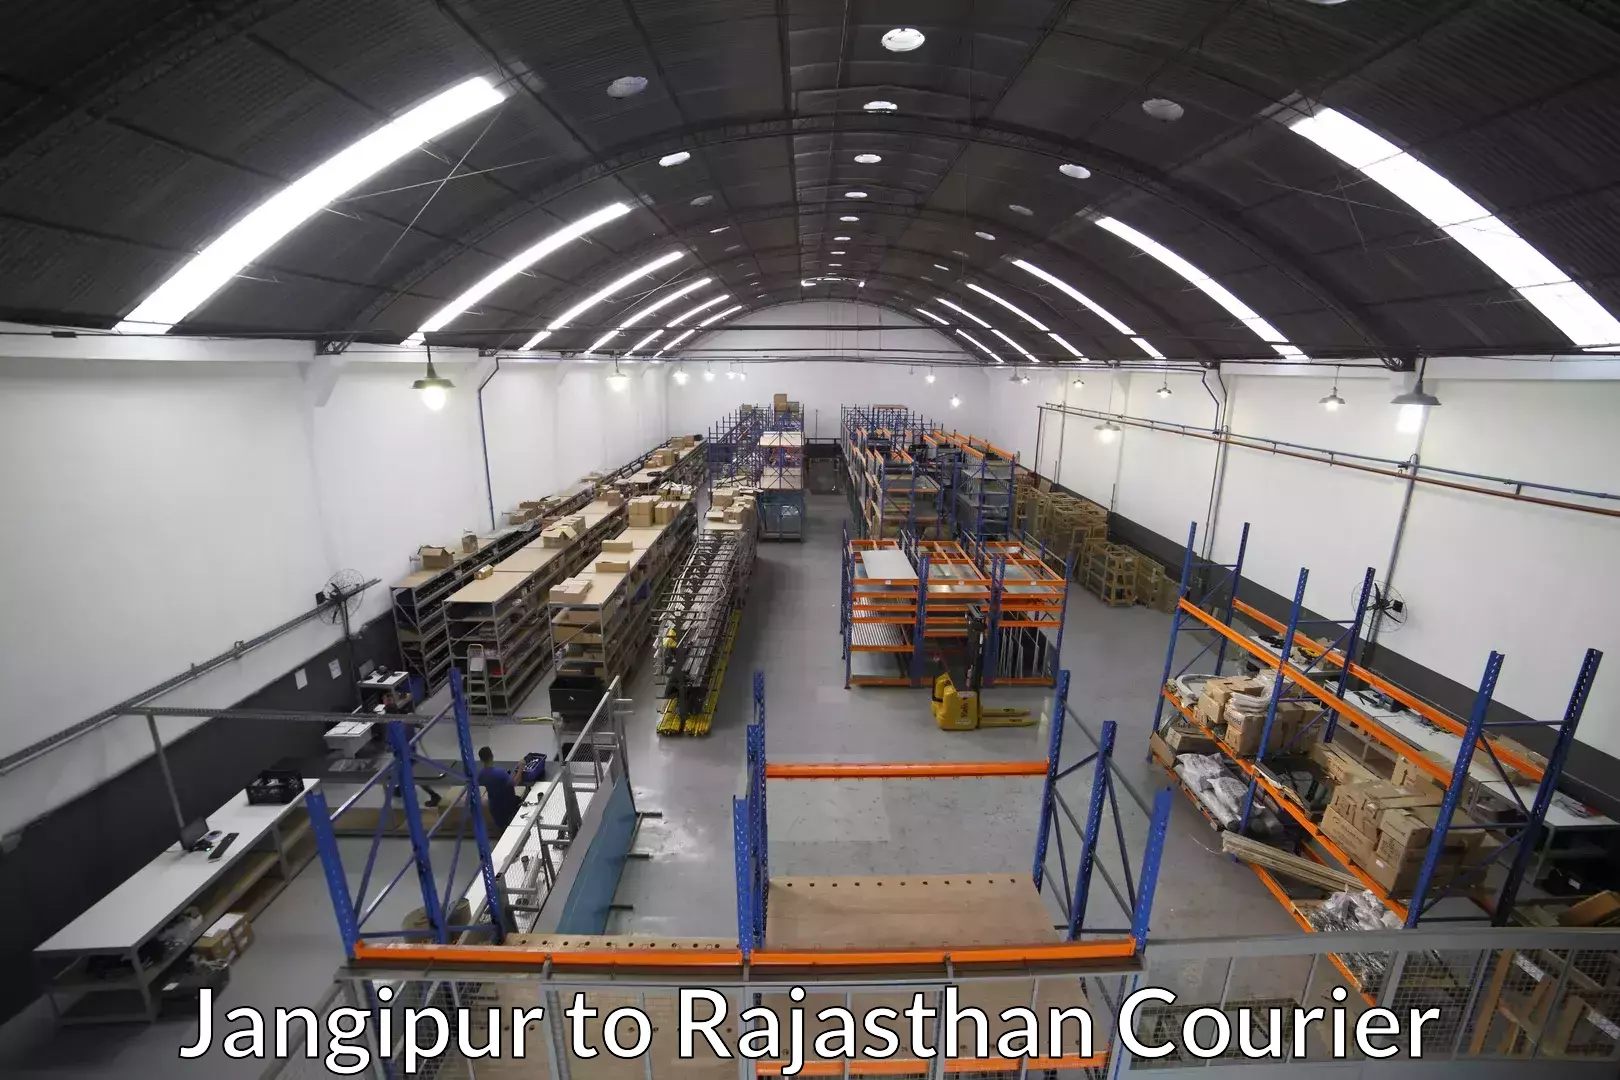 Furniture delivery service Jangipur to Rajasthan